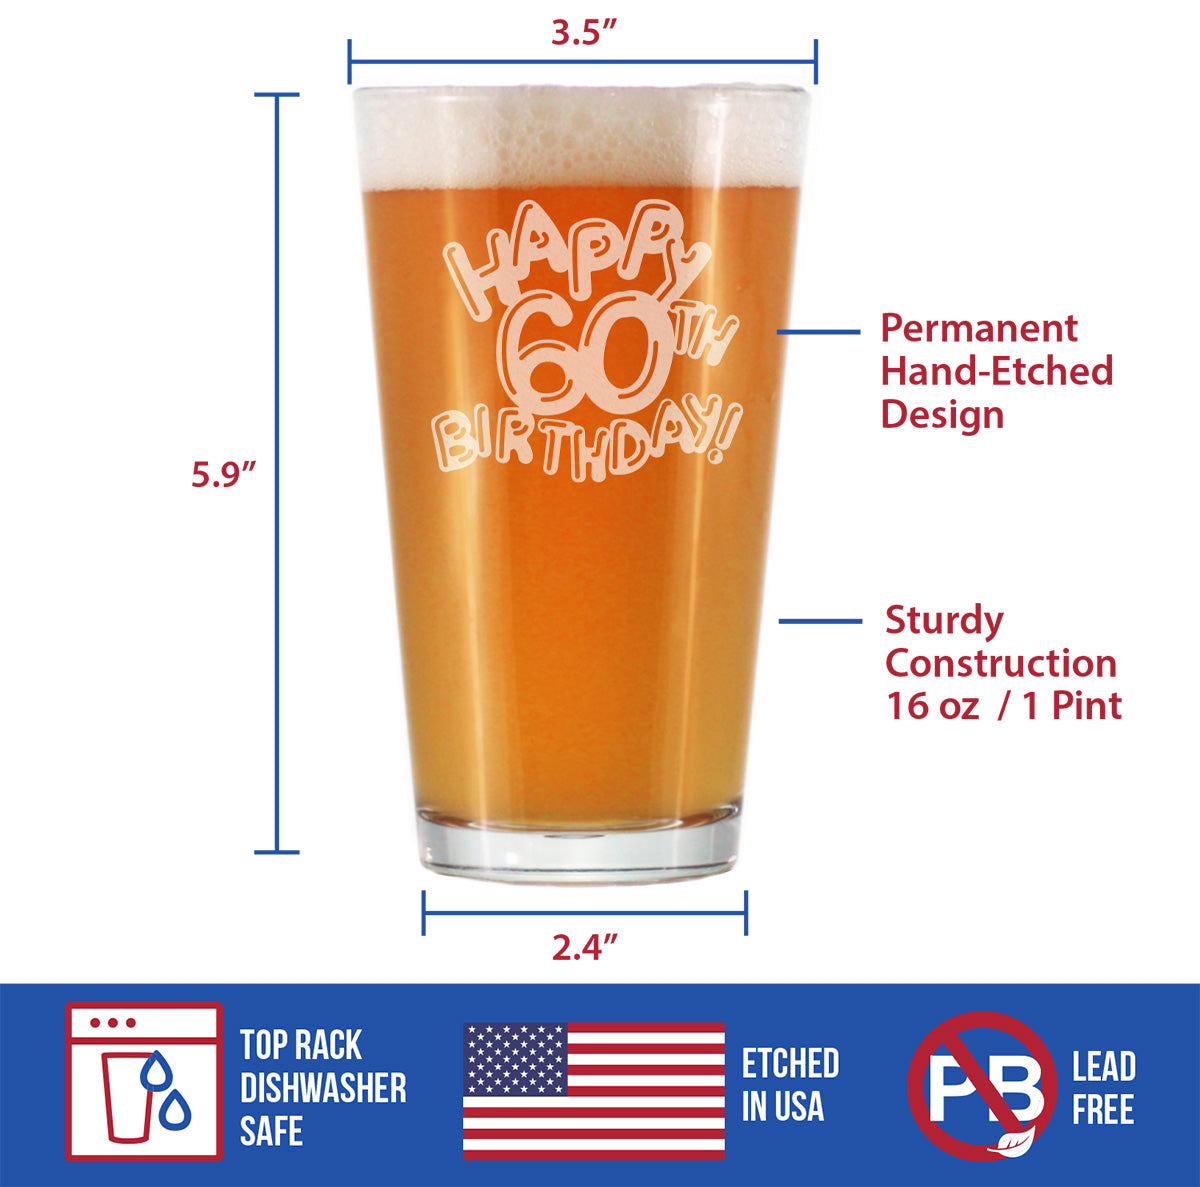 Happy 60th Birthday Balloons - Pint Glass for Beer - Gifts for Women &amp; Men Turning 60 - Fun Bday Party Decor - 16 Oz